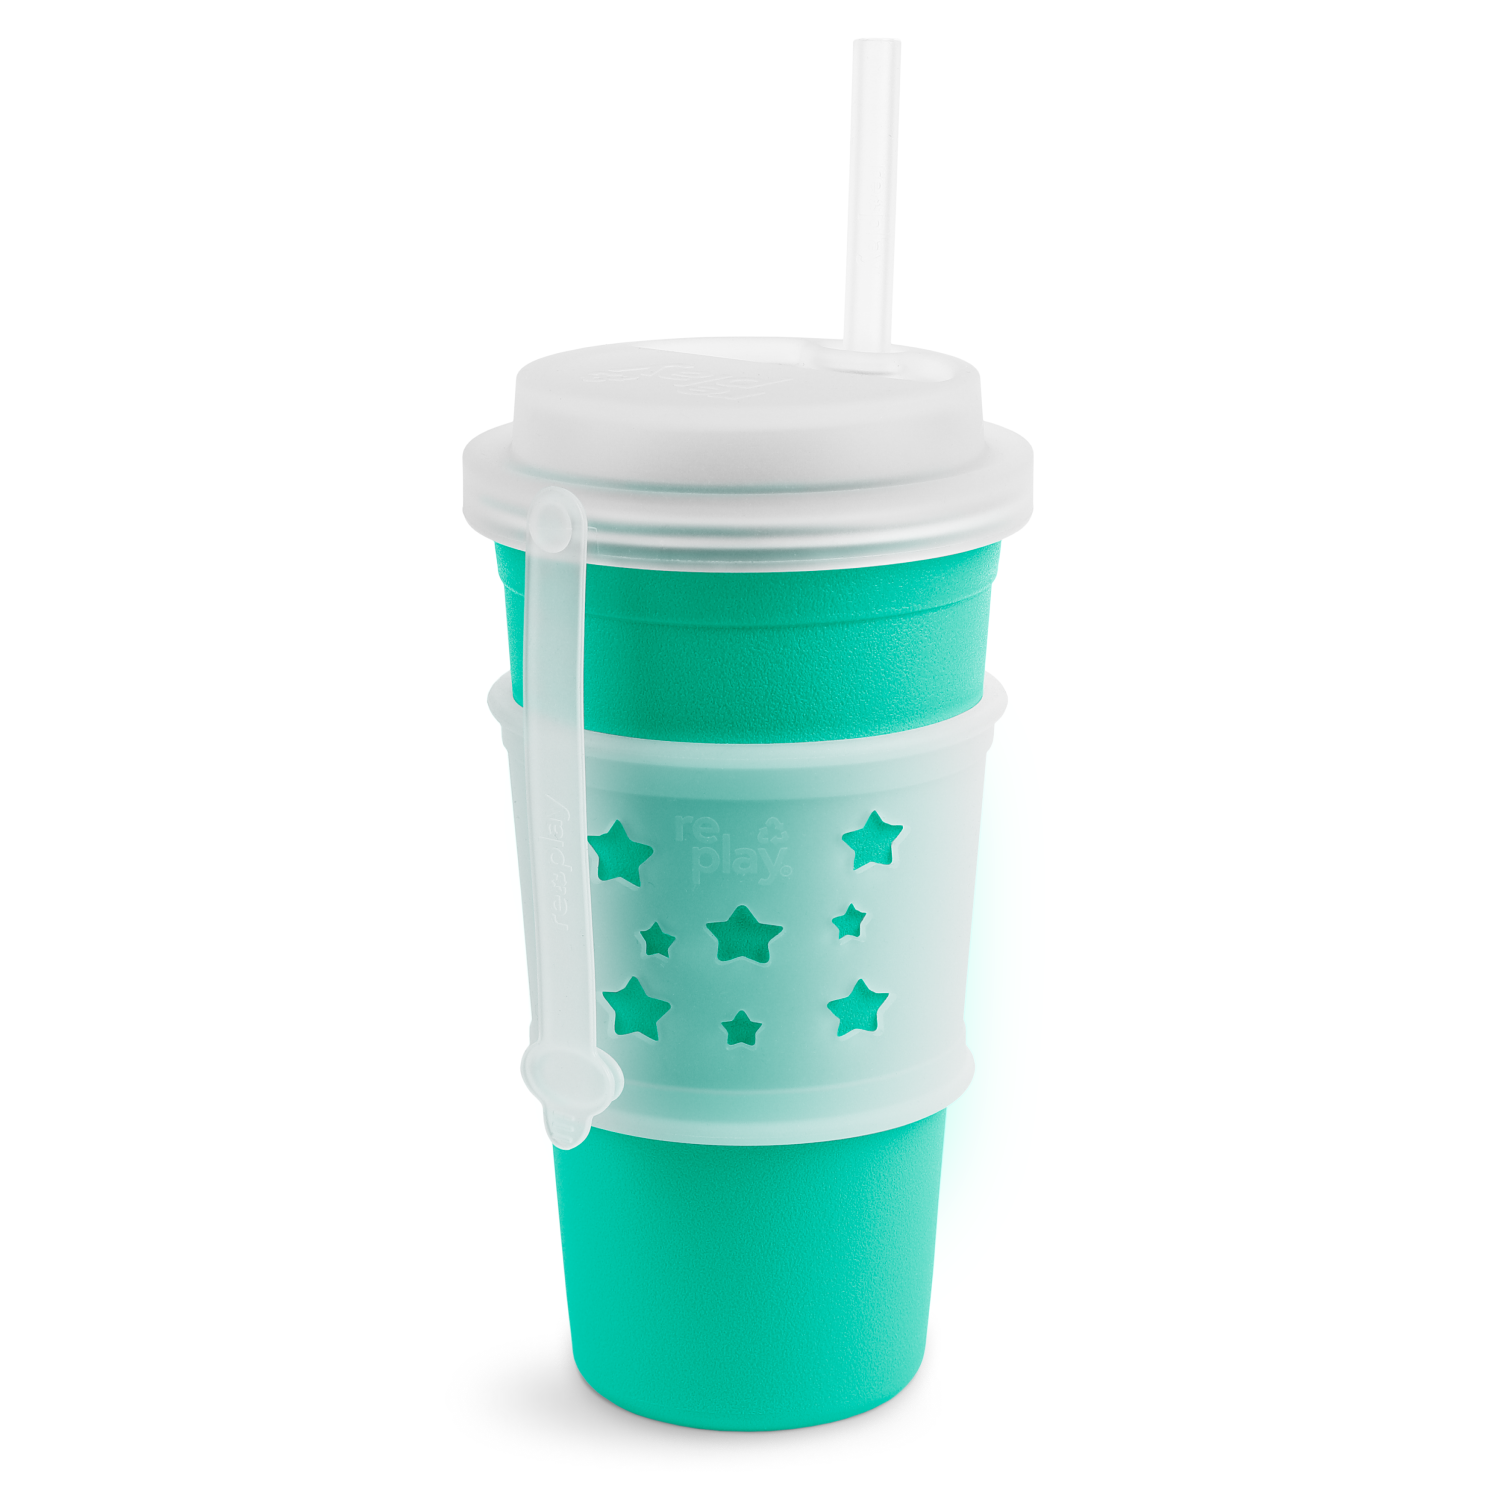 Re-Play Made in The USA 4pk No Spill Sippy Cups for Baby, Toddler, and  Child Feeding - Sky Blue, Aqua, Navy, Teal (True Blue+) 